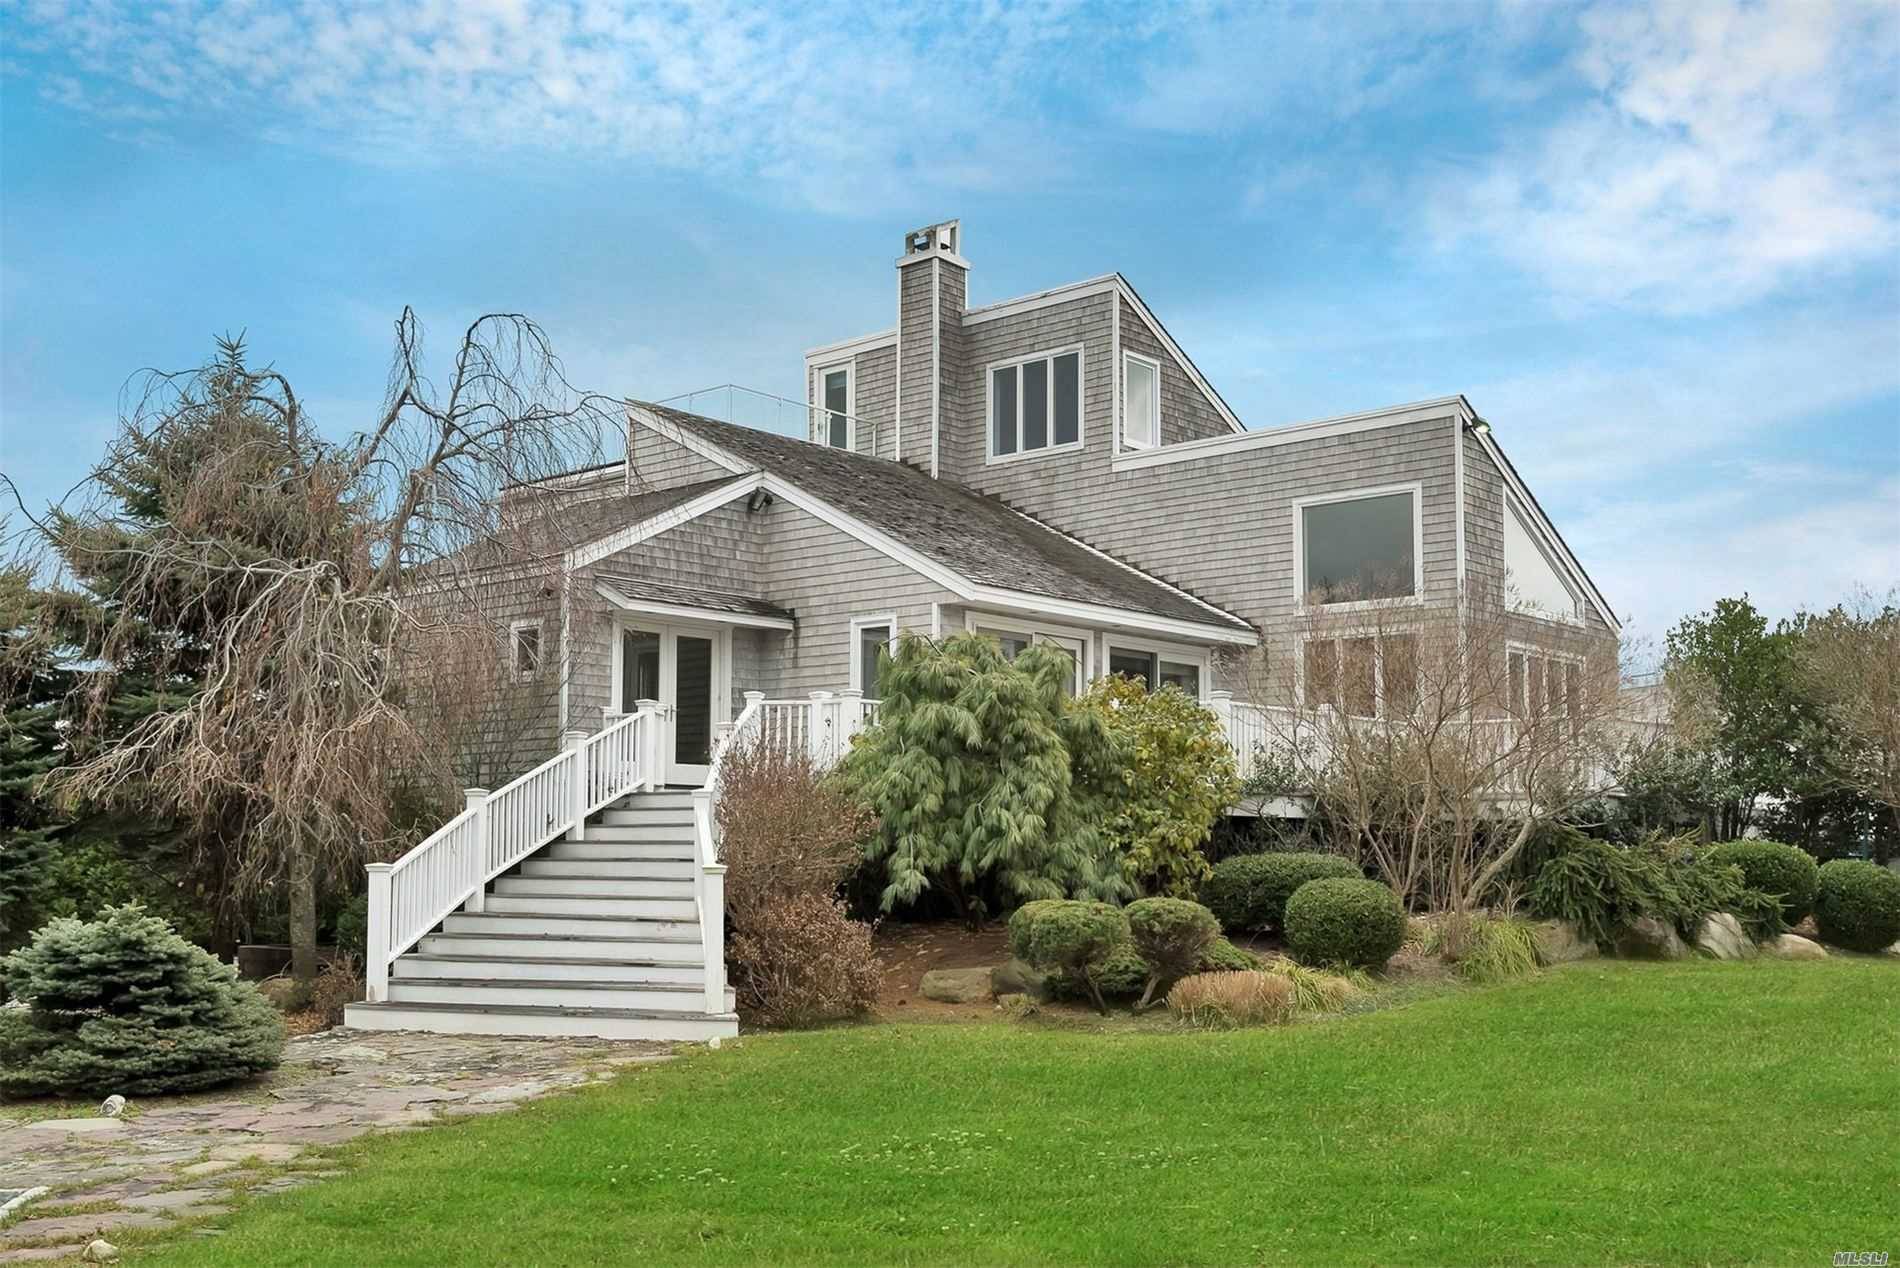 Handsome and spacious Contemporary home on the water in the highly desired Village of Quogue.